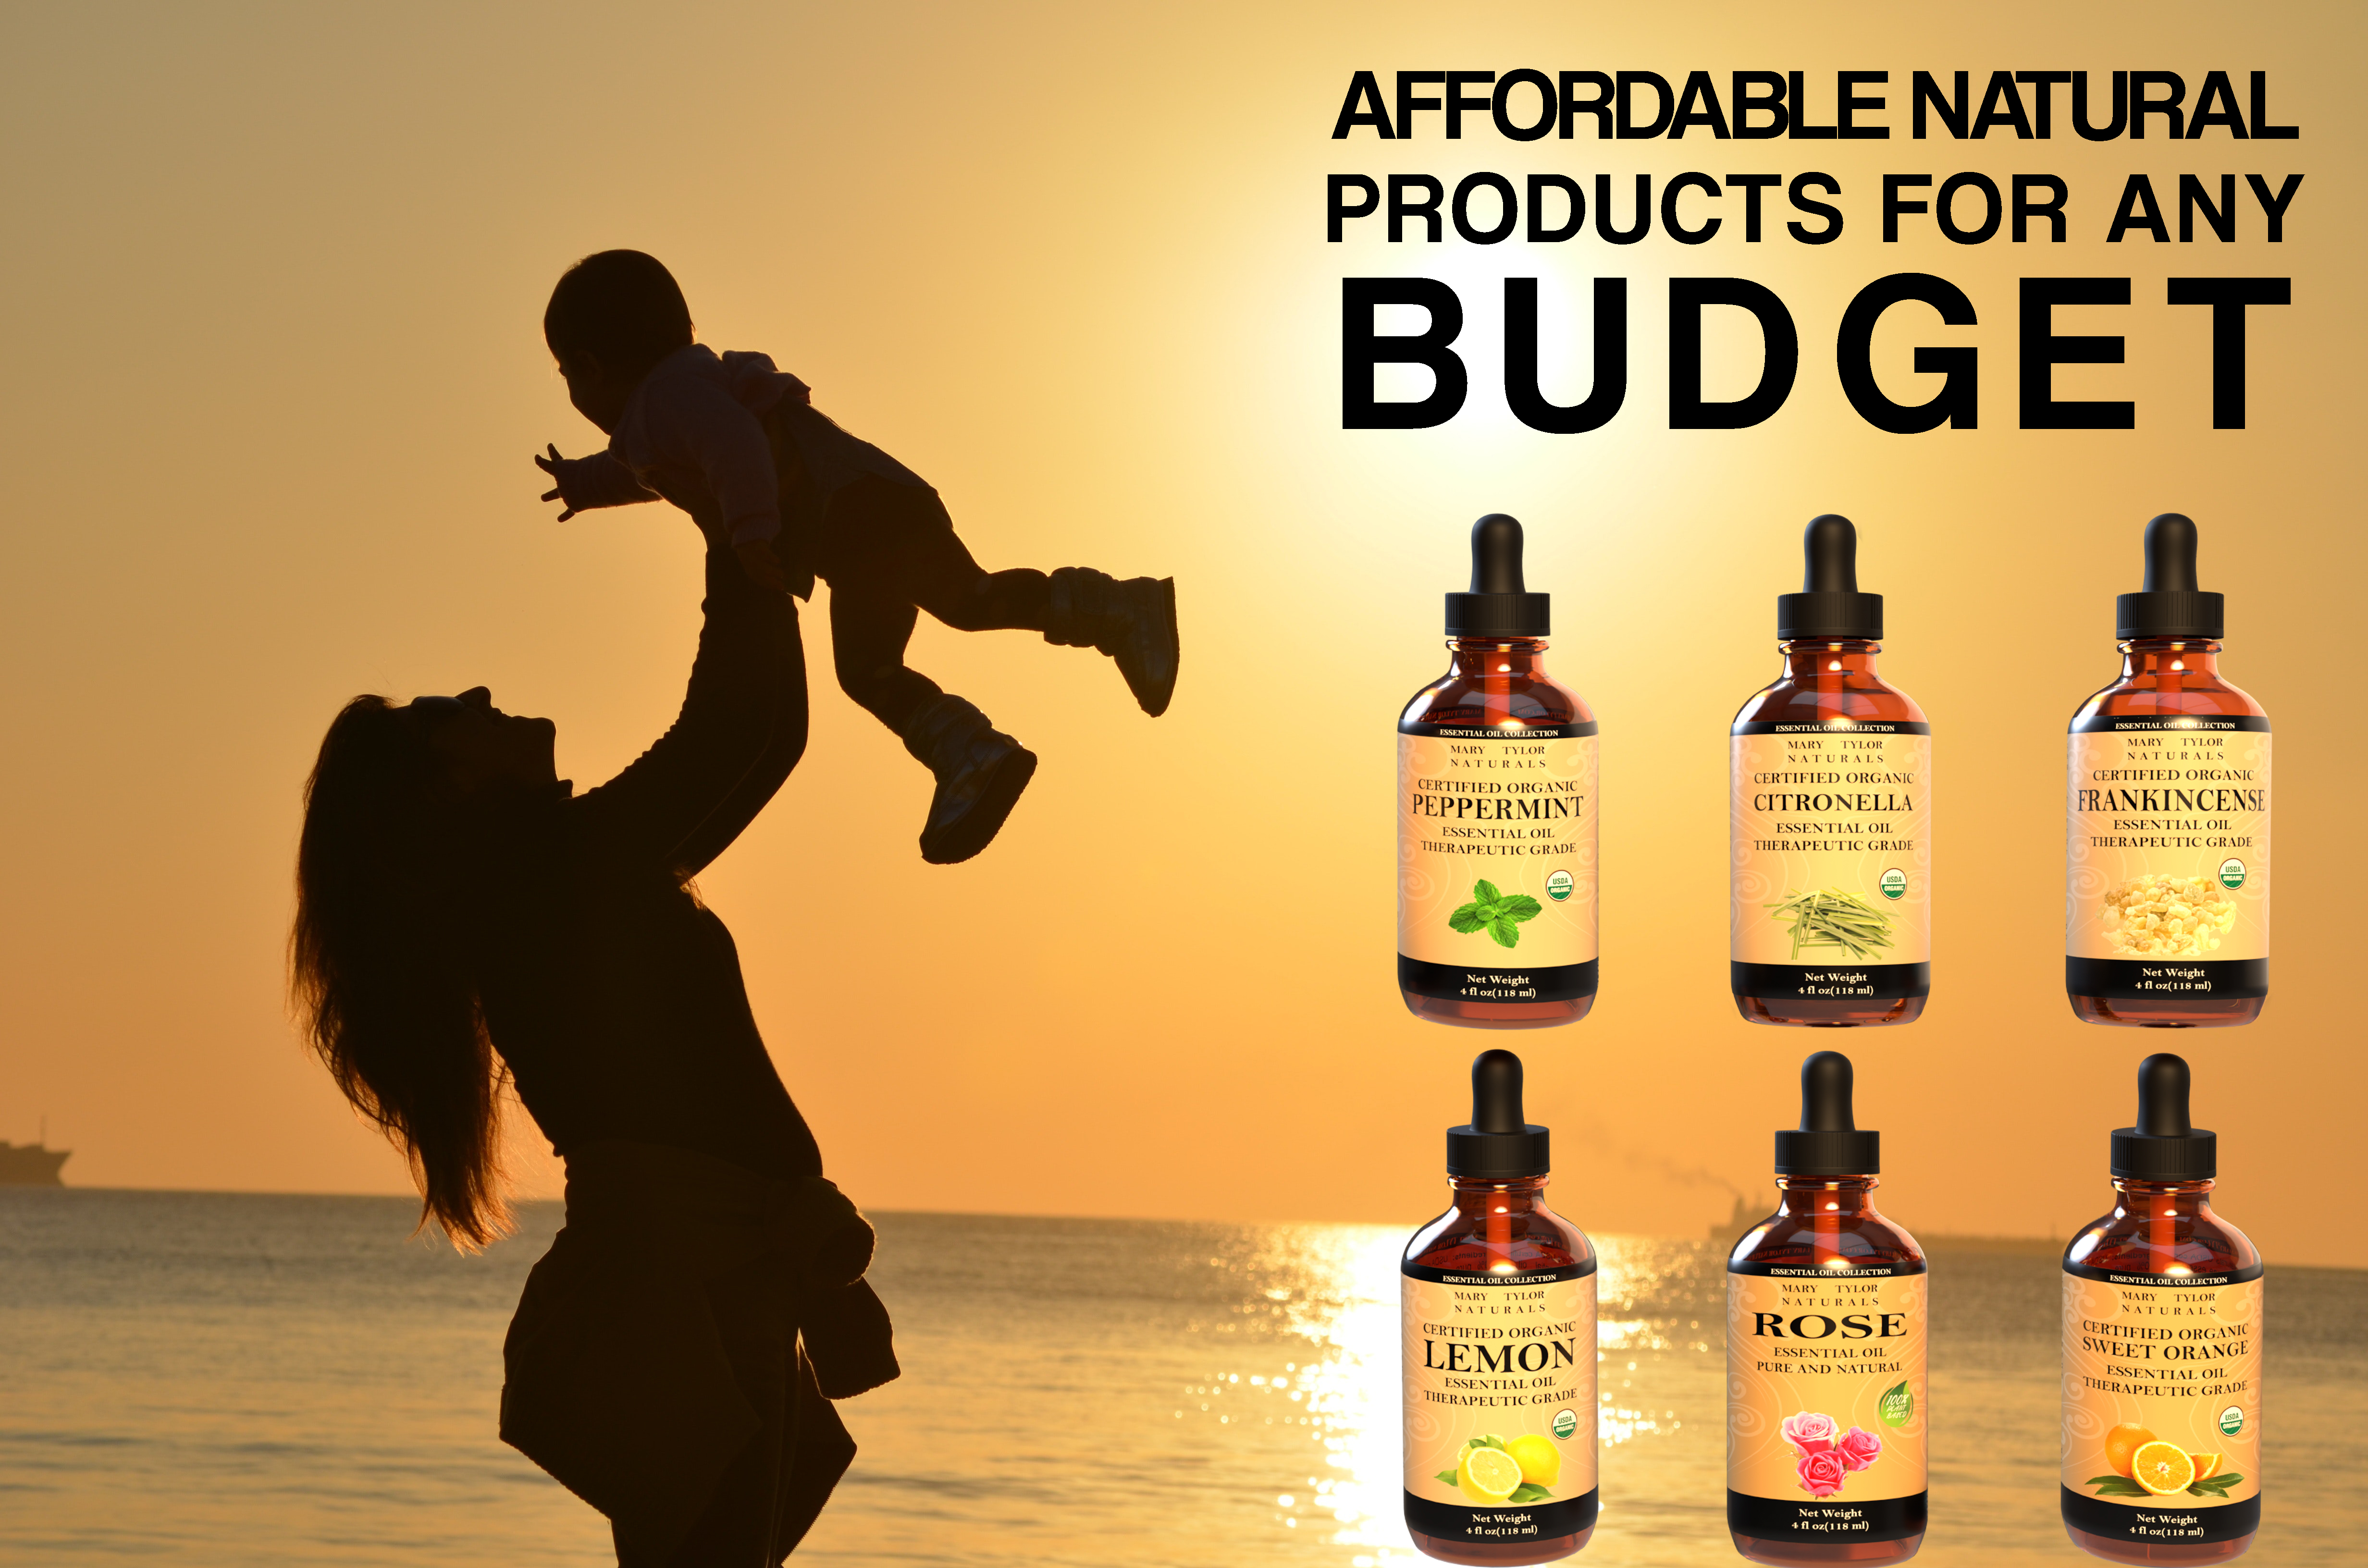 Florida business offers affordable natural products for any budget. 